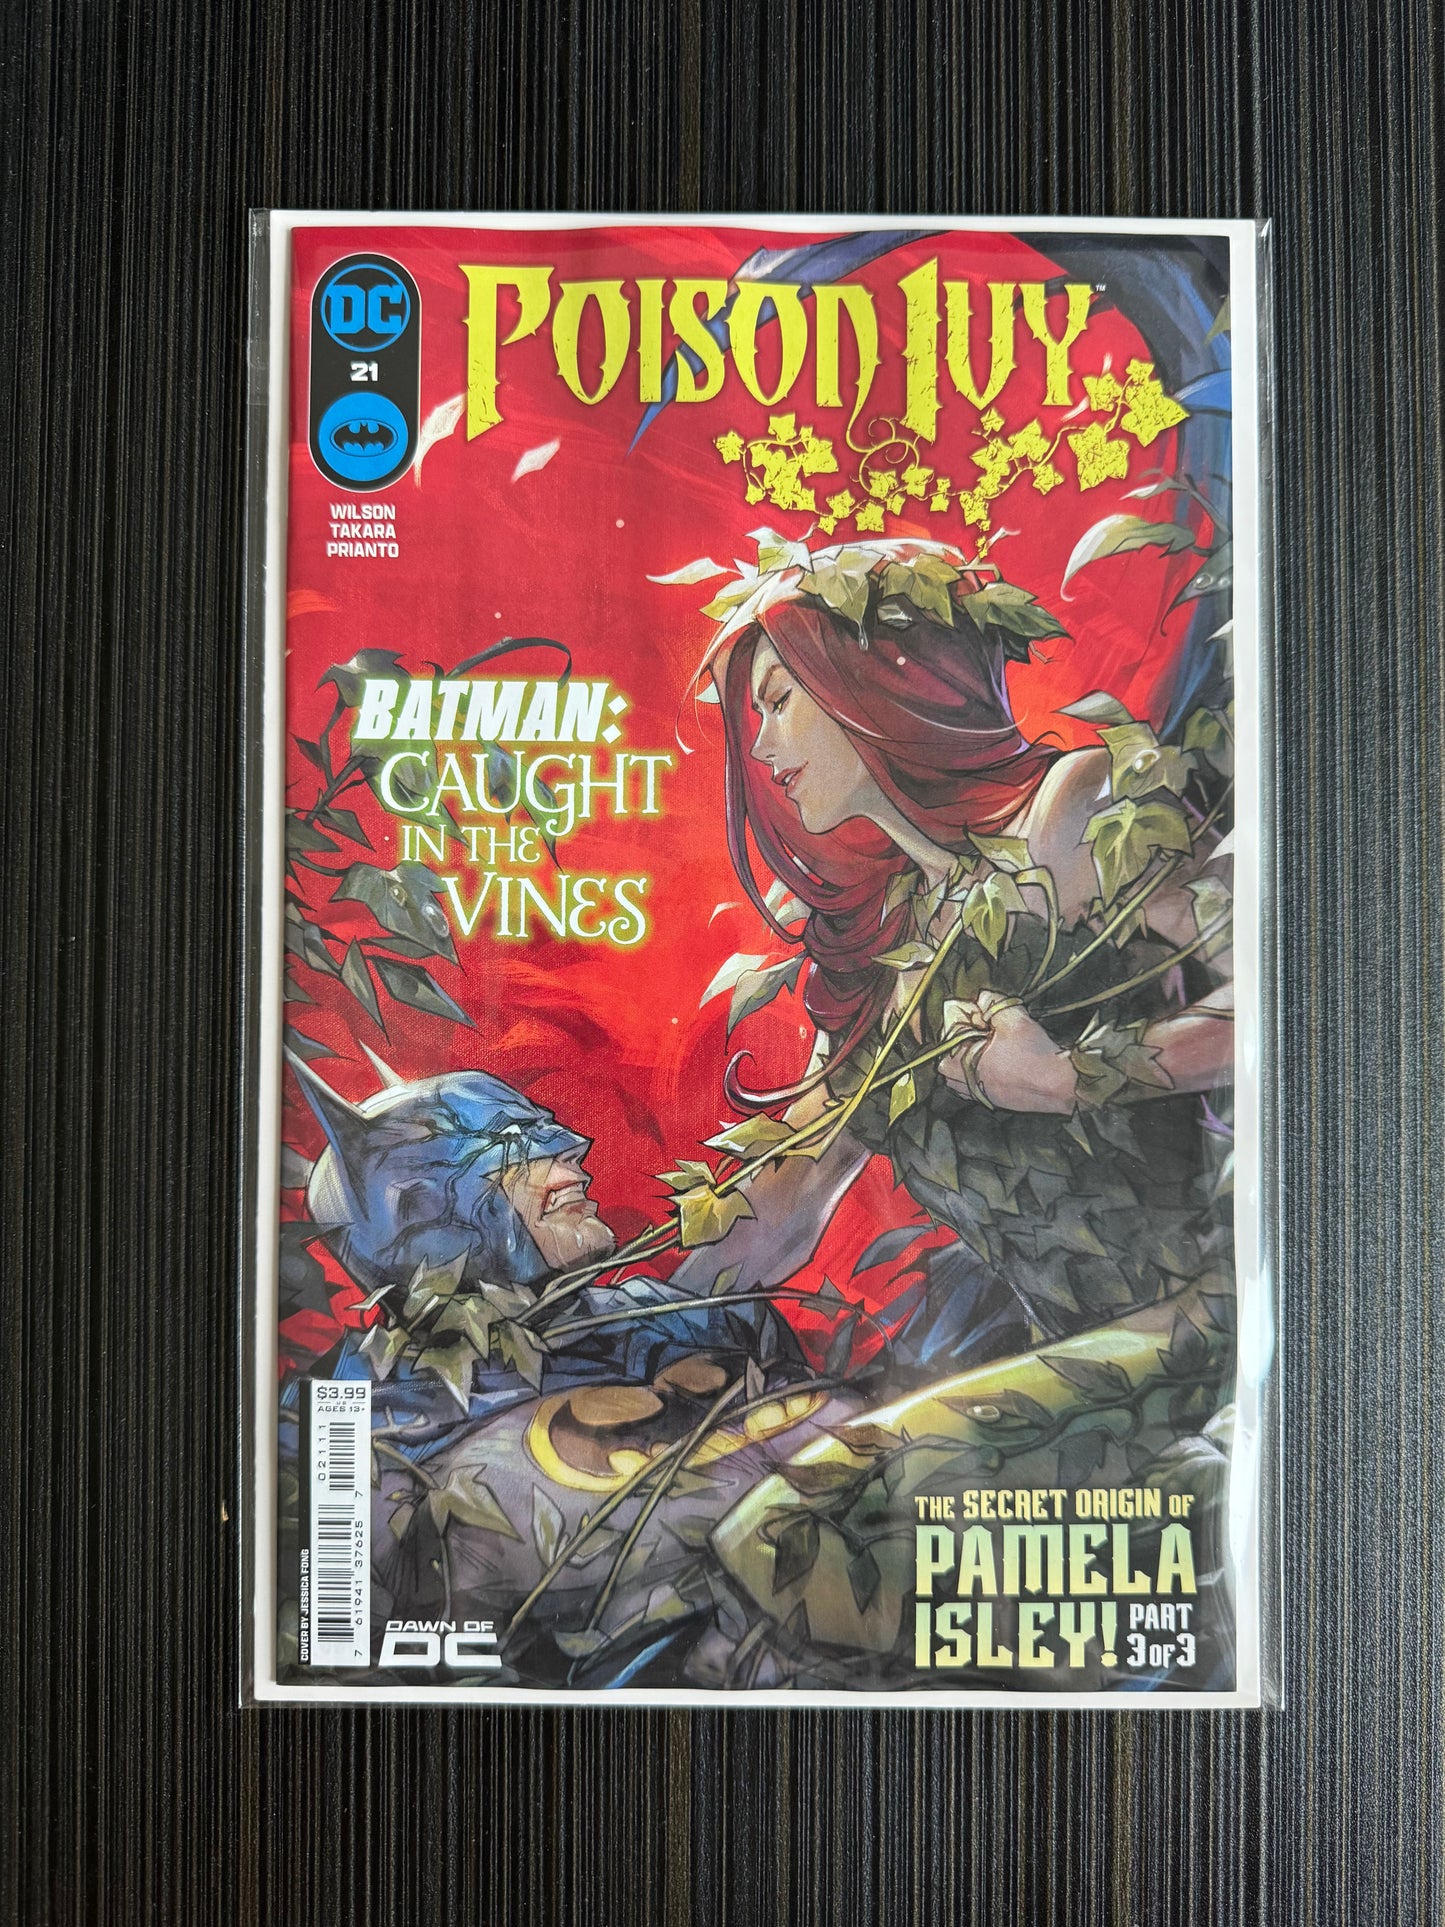 Poison Ivy #21 Cover A Jessica Fong